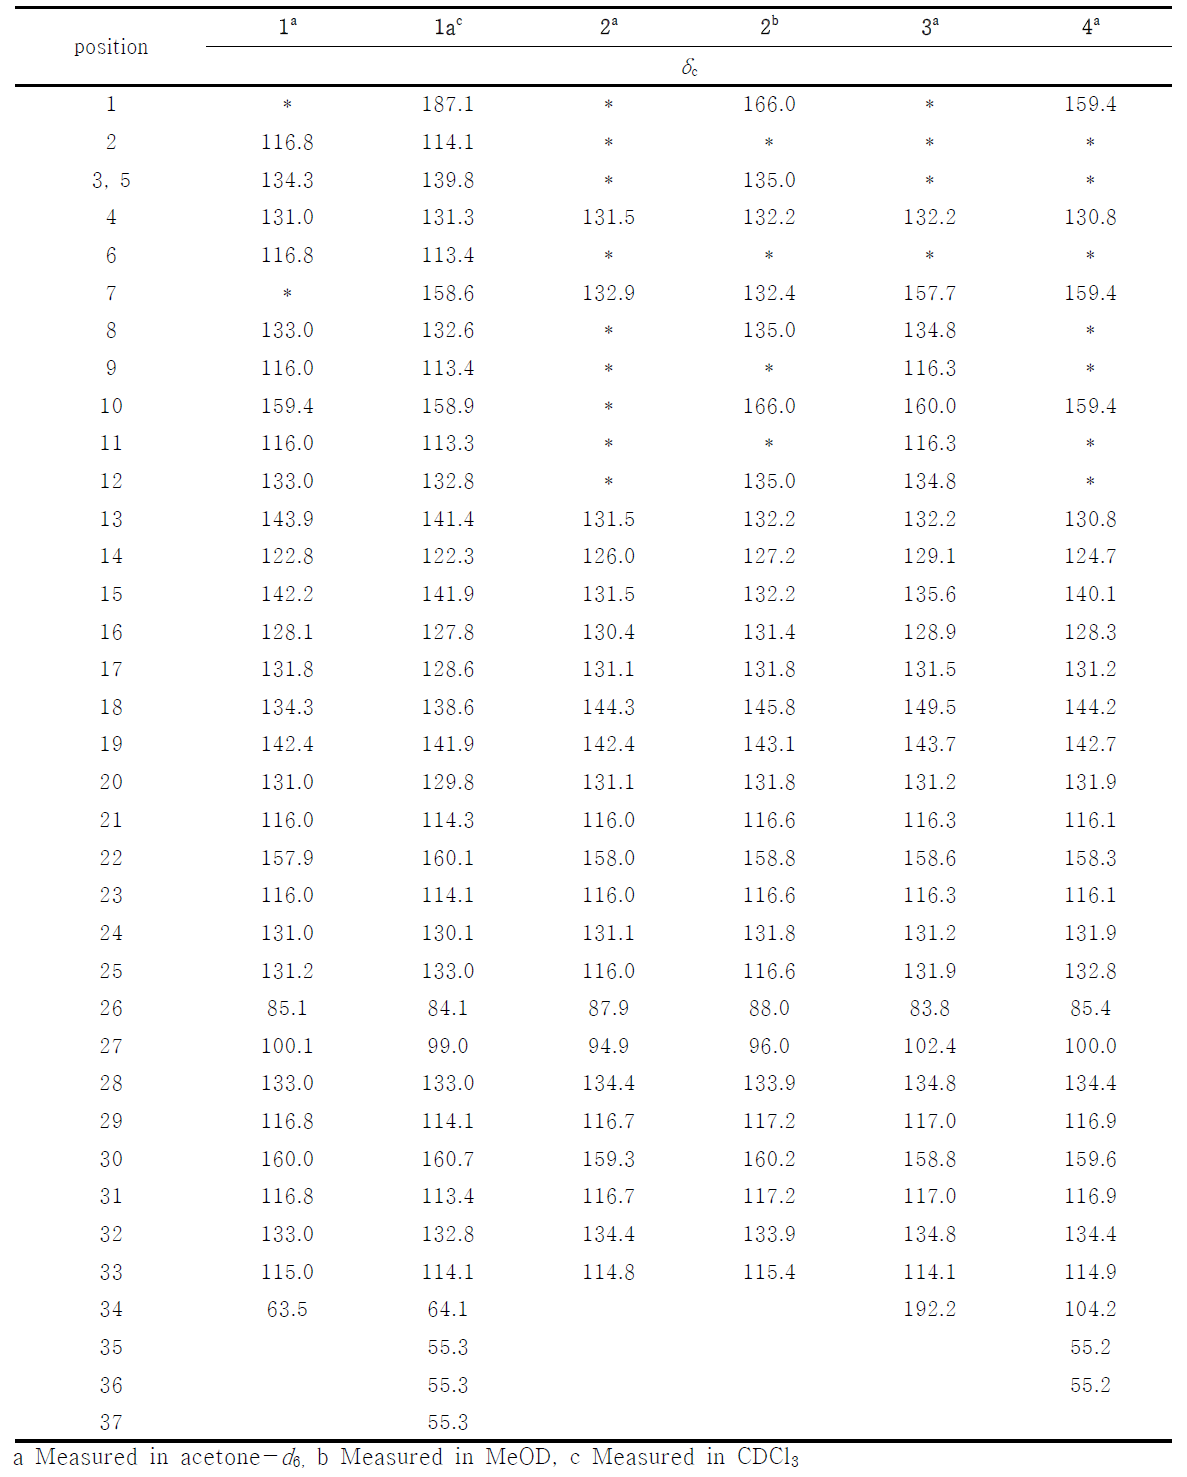 13C-NMR data of compounds 1, 1a-4